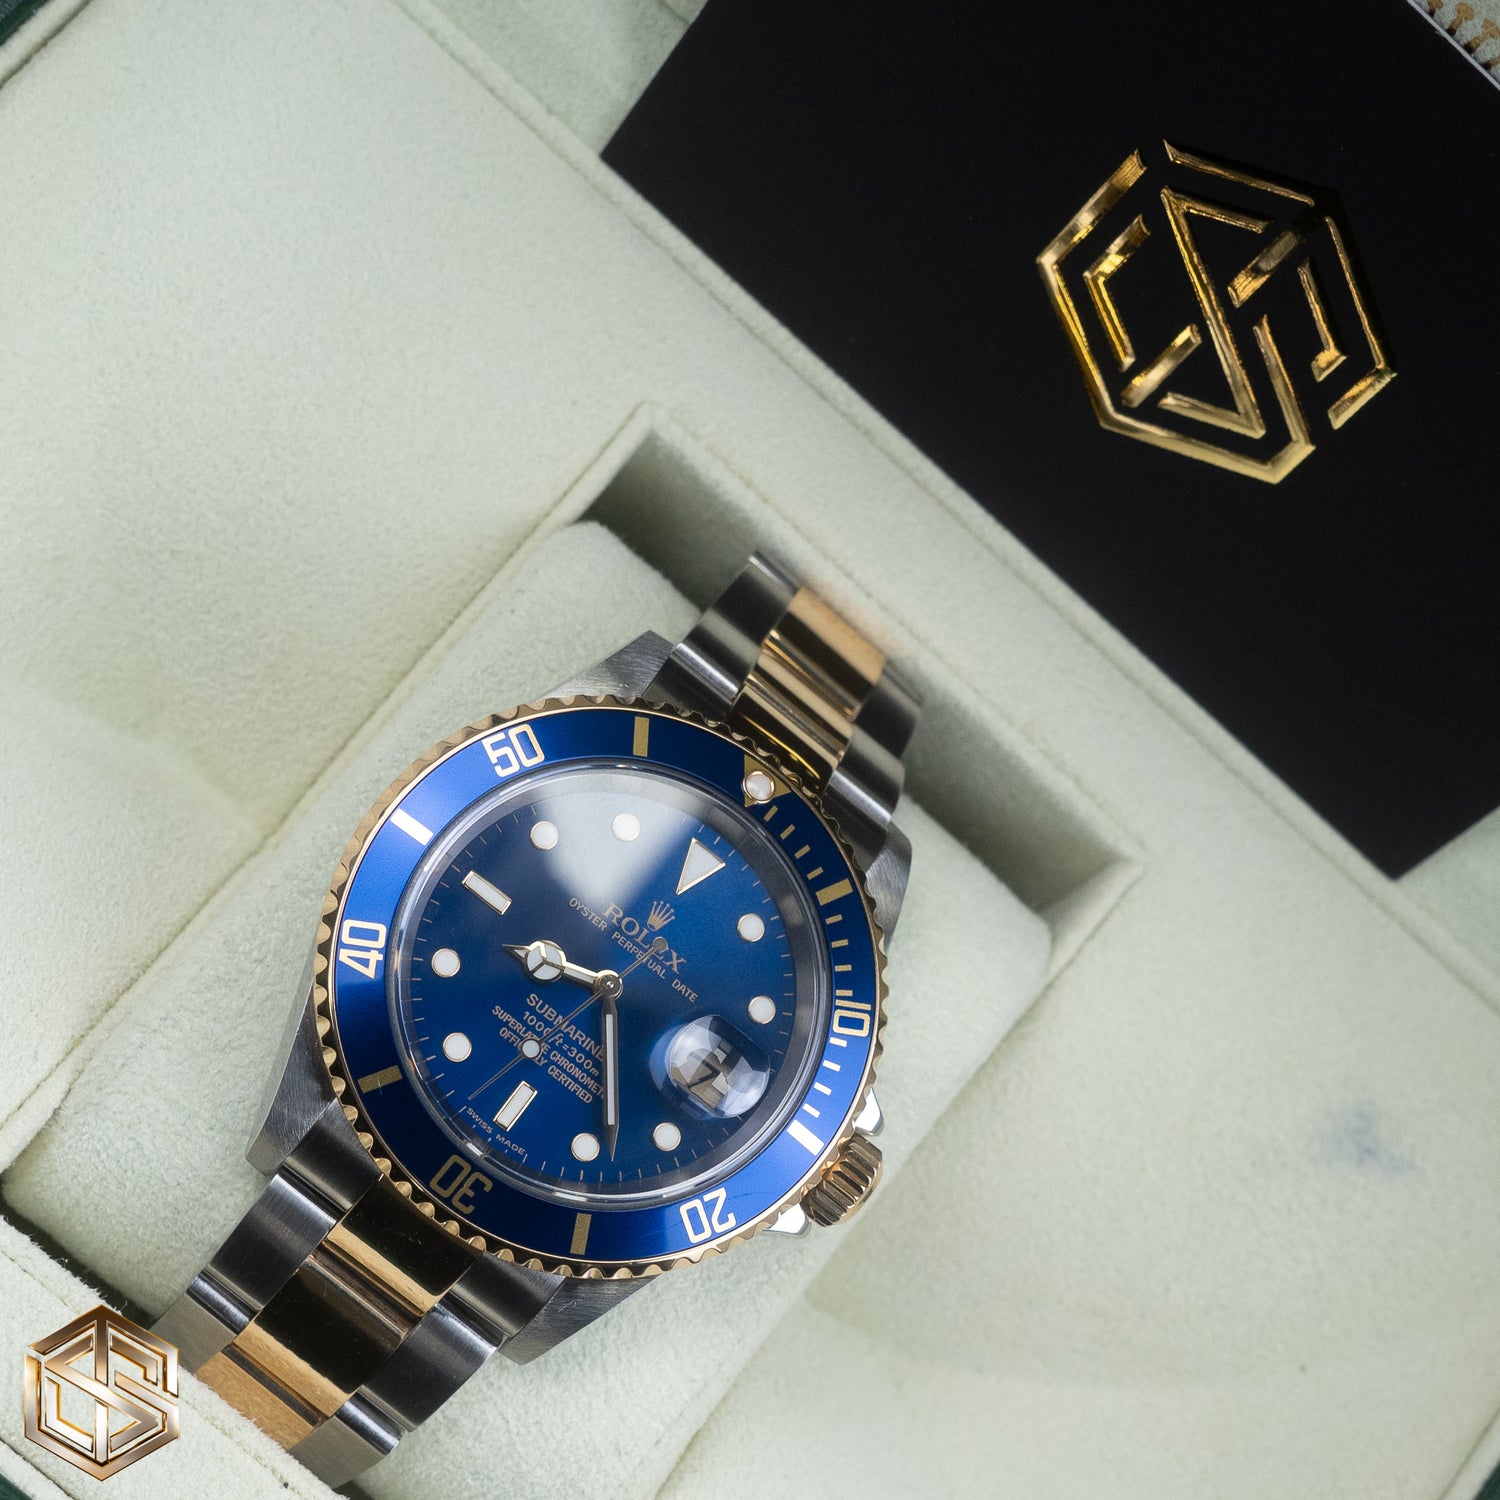 Rolex 16613 Submariner Date 'Bluesy' 2008 Serviced 2018 Full Collector's Set Watch